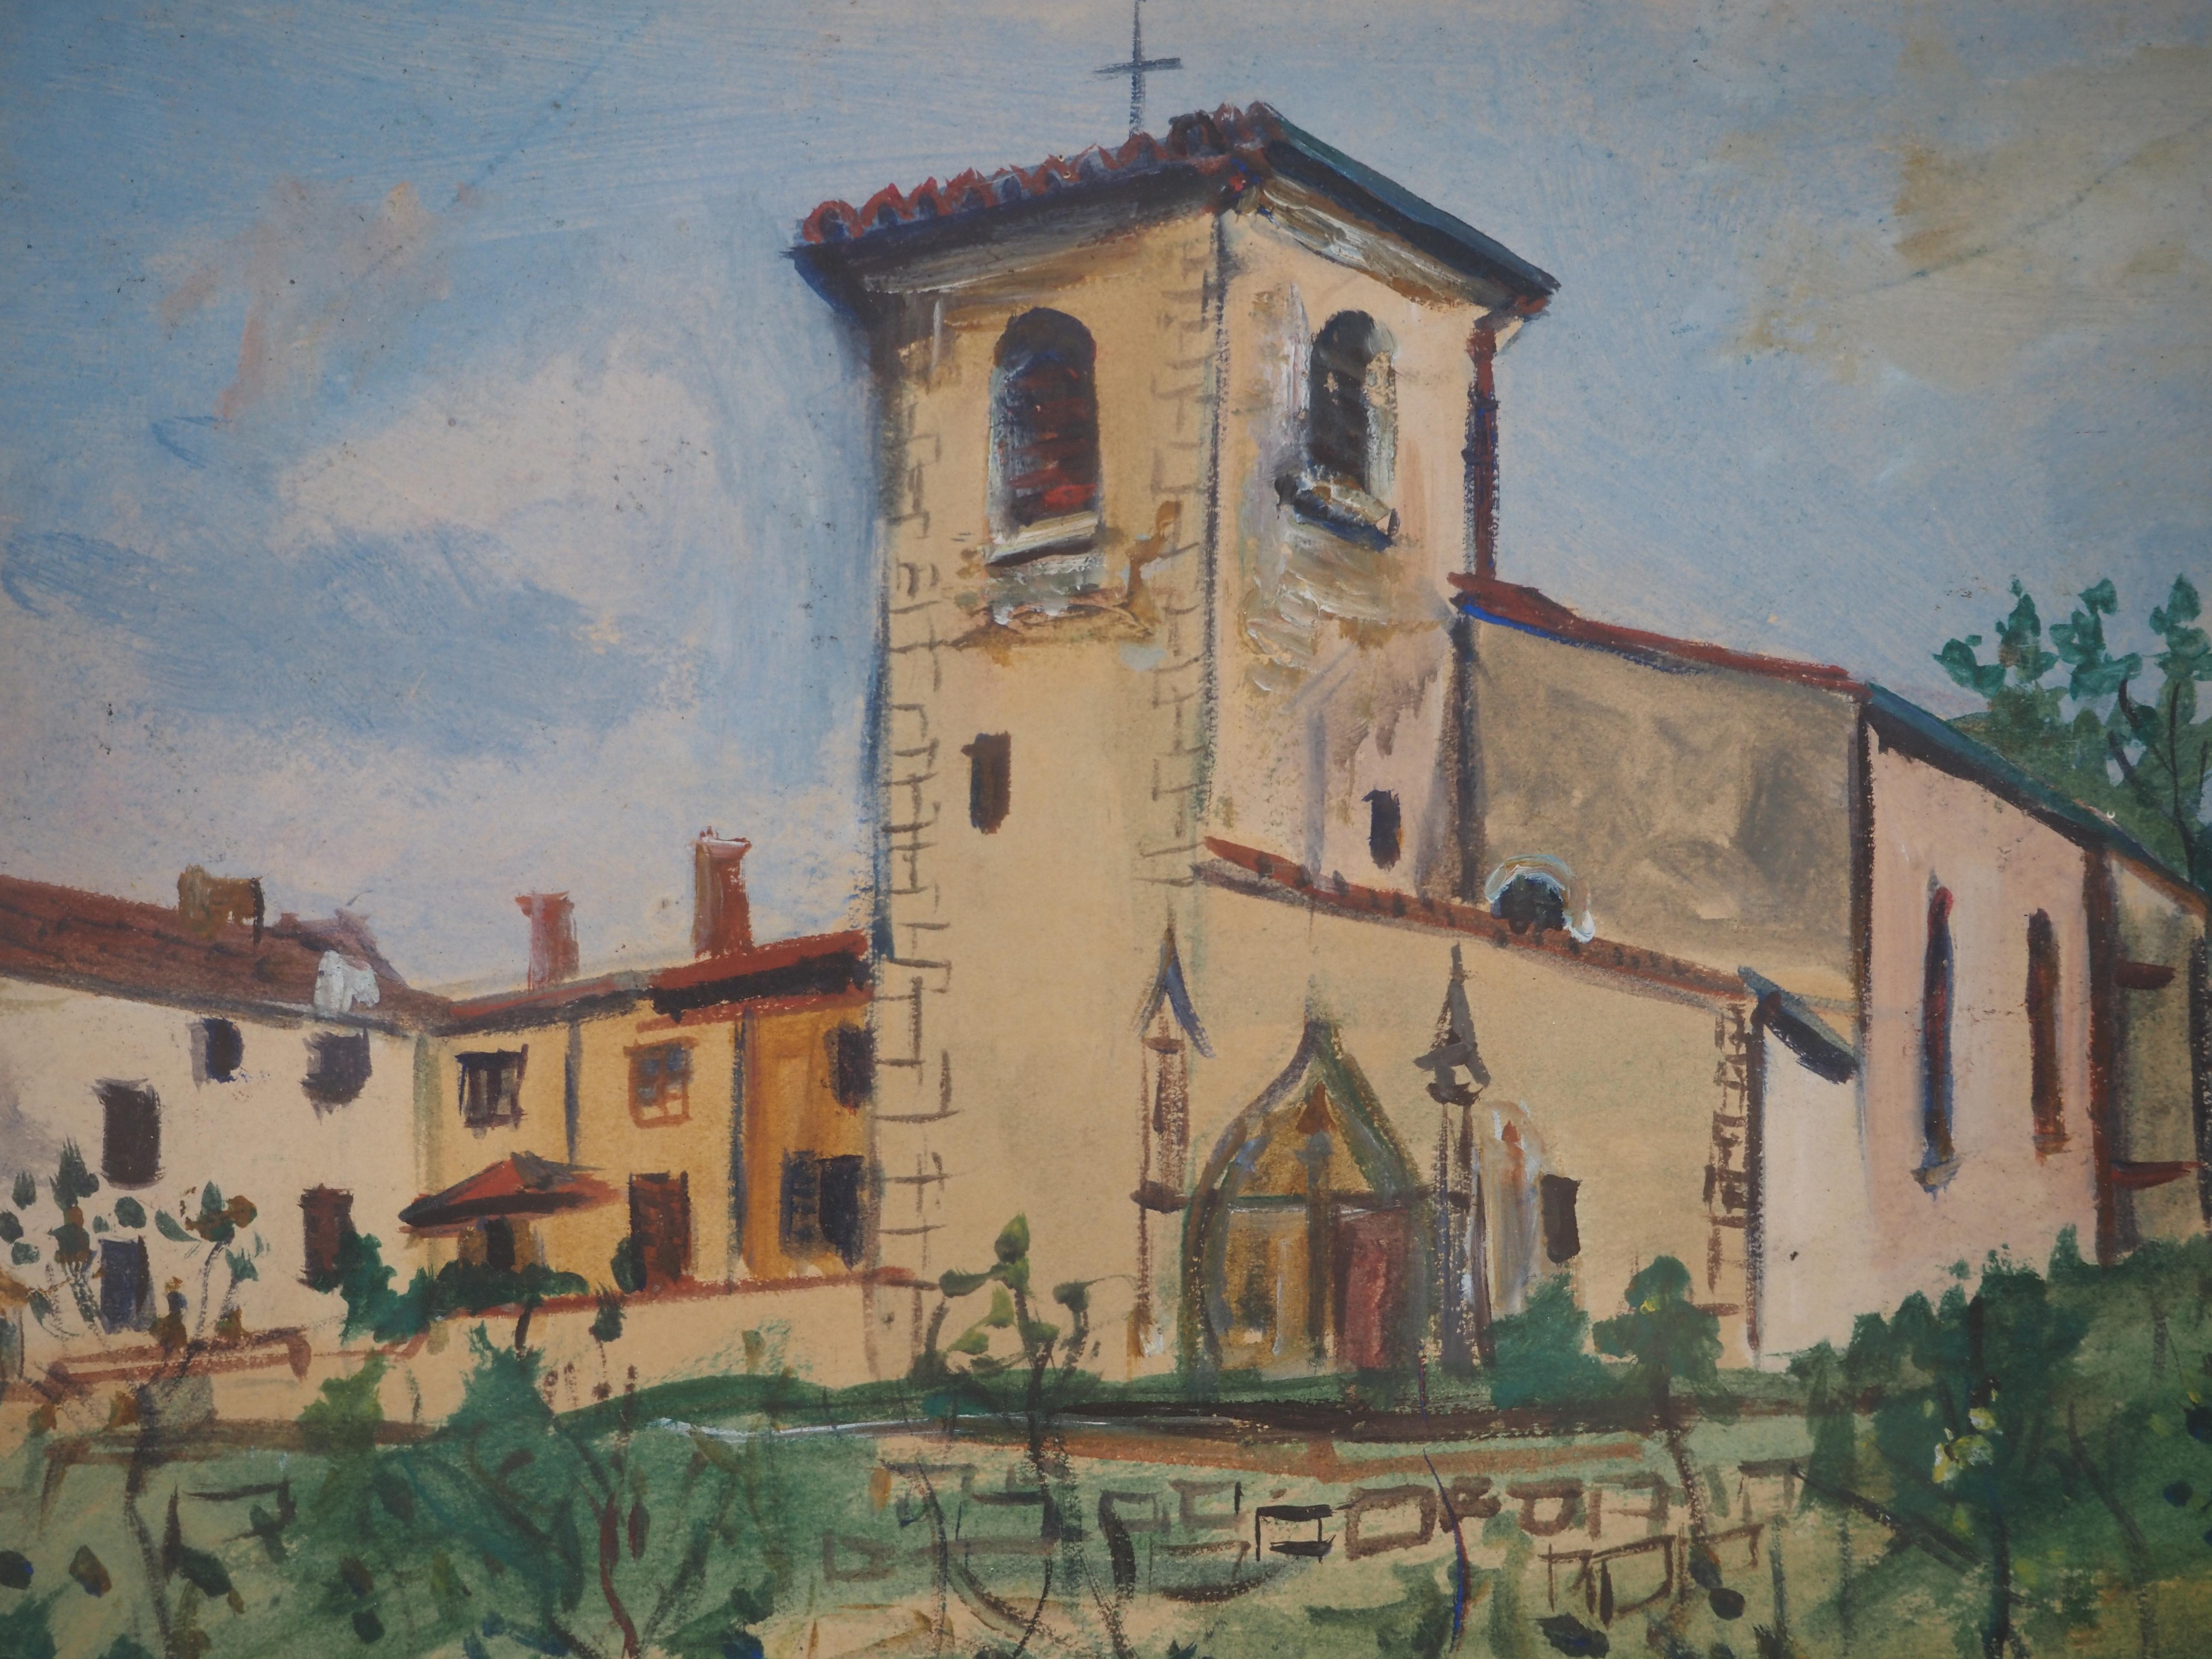 Church of St Bernard - Original gouache on paper, Handsigned - Realist Painting by Maurice Utrillo